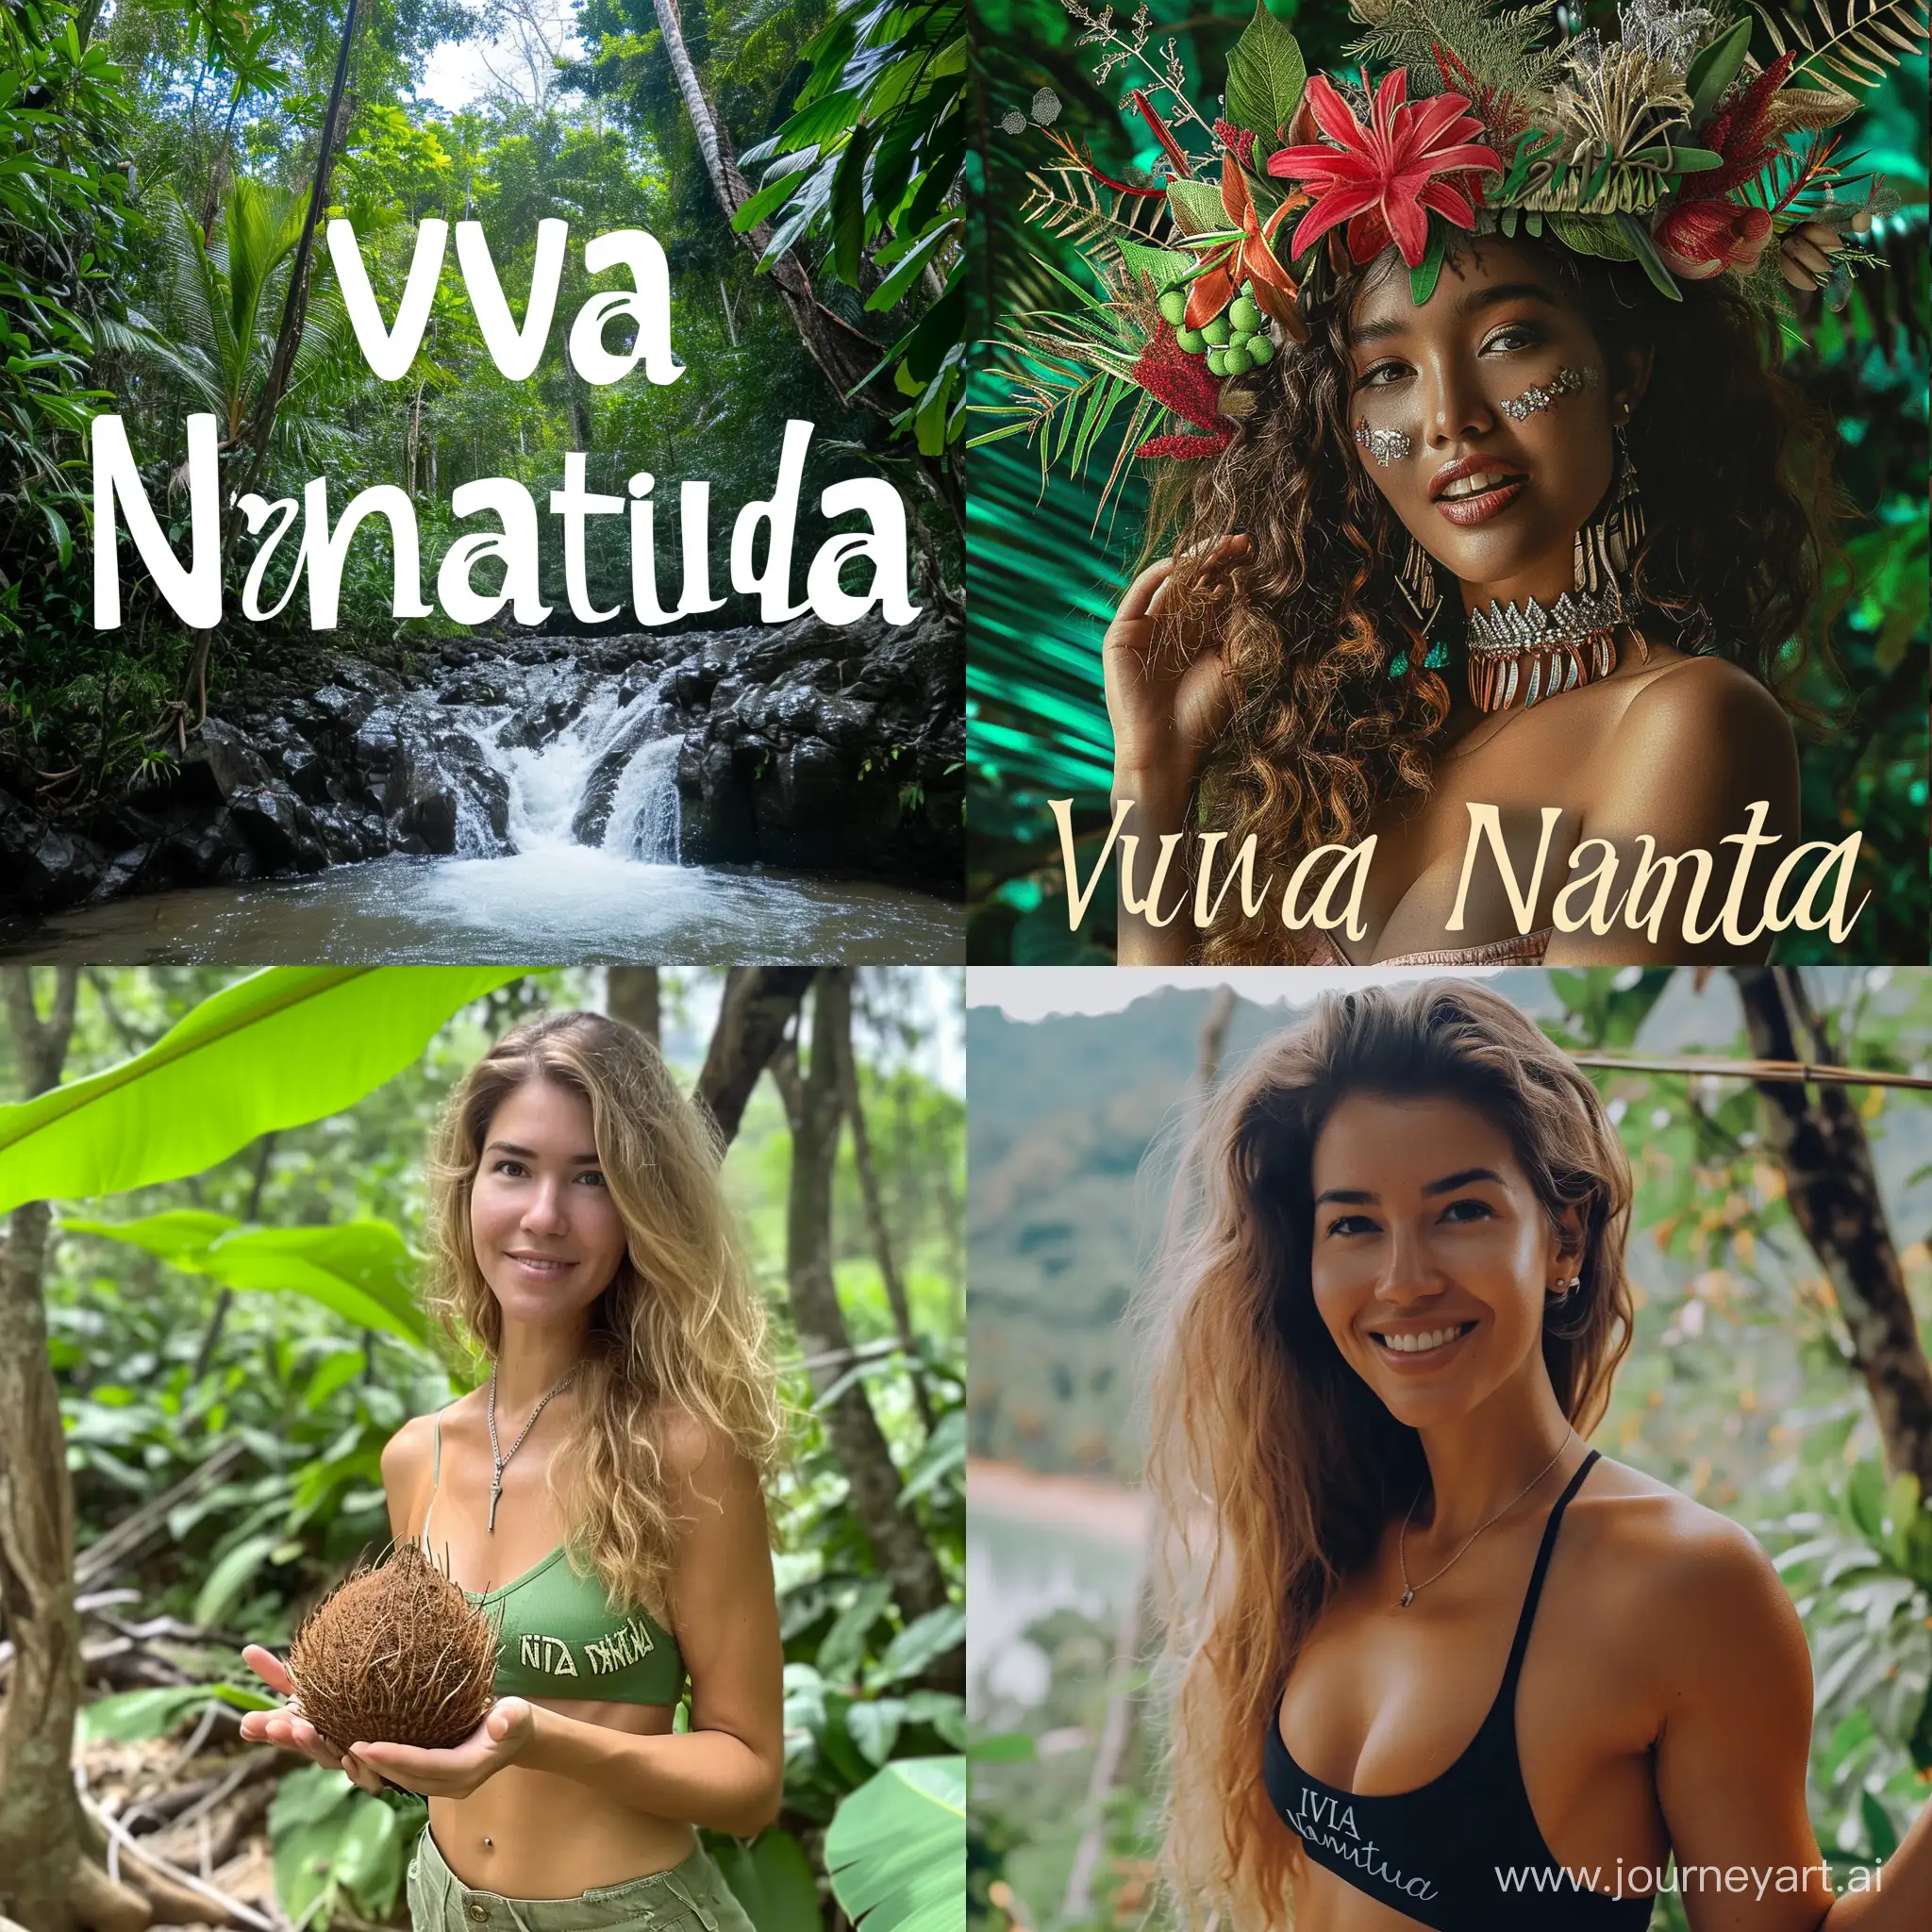 Make me a YouTube channel profile pic channel is called Viva Nature 